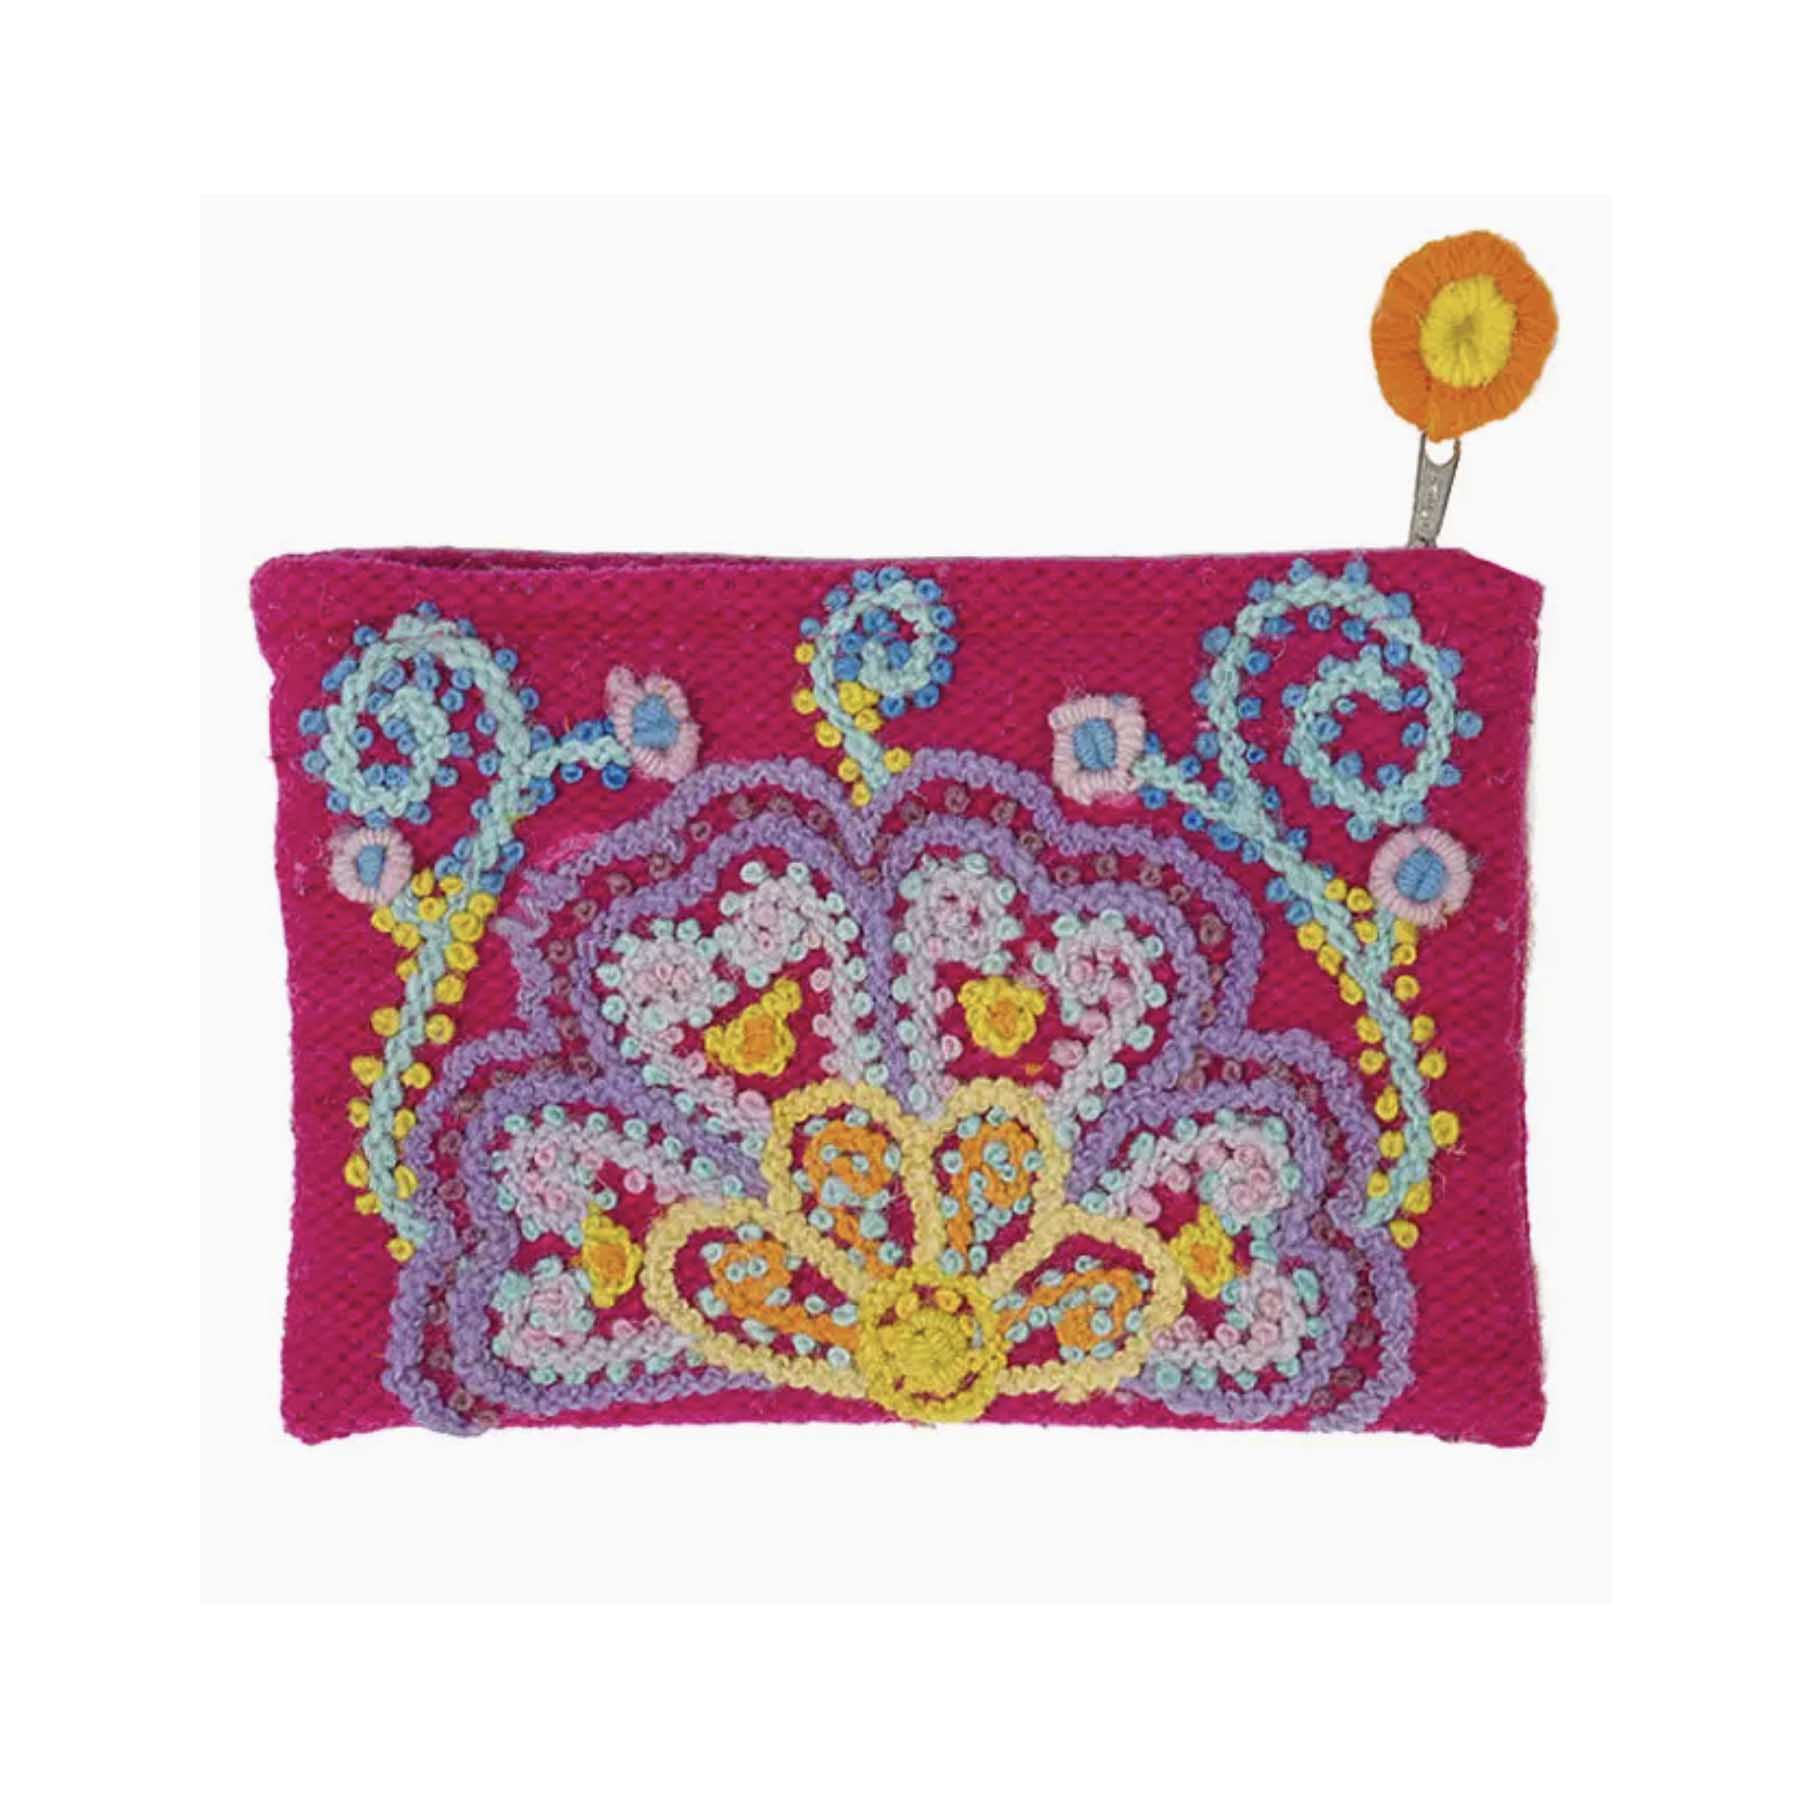 Jenny Krauss Comina Pink Floral Embroidered Wool Pouch